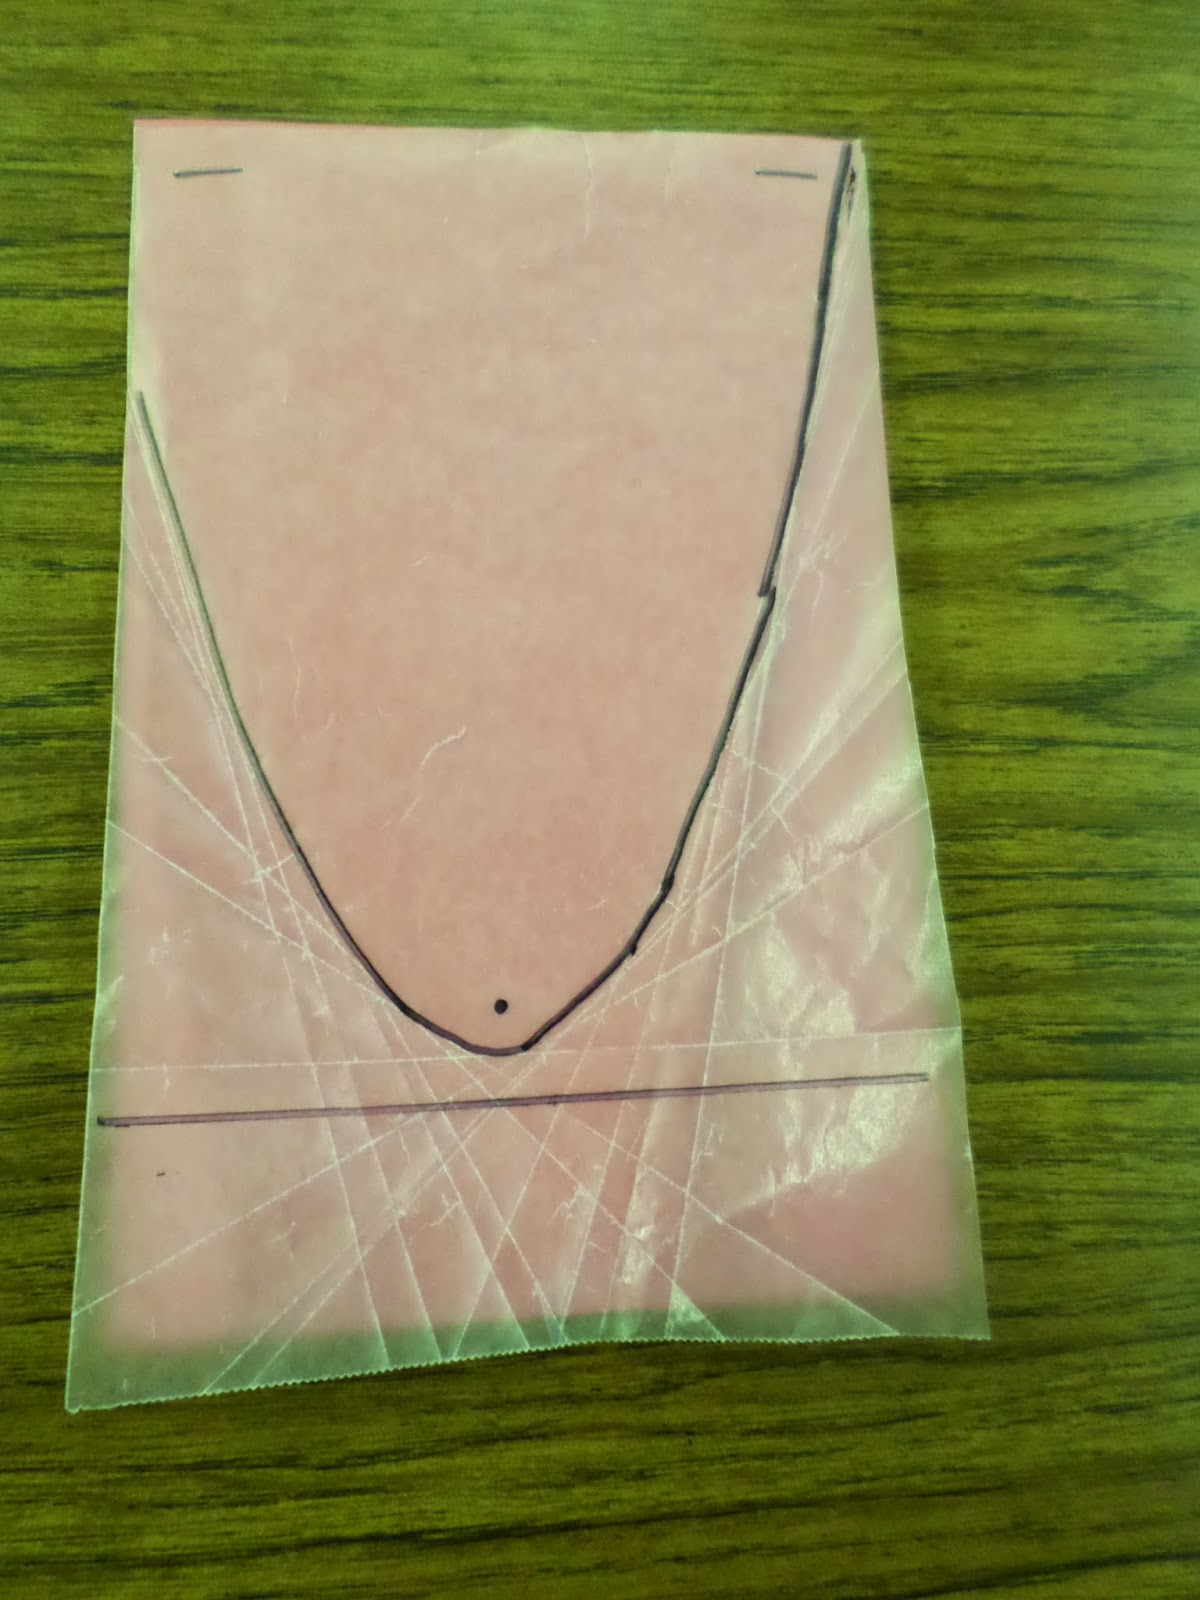 Wax Paper Parabola Activity Stapled to Colored Paper. 